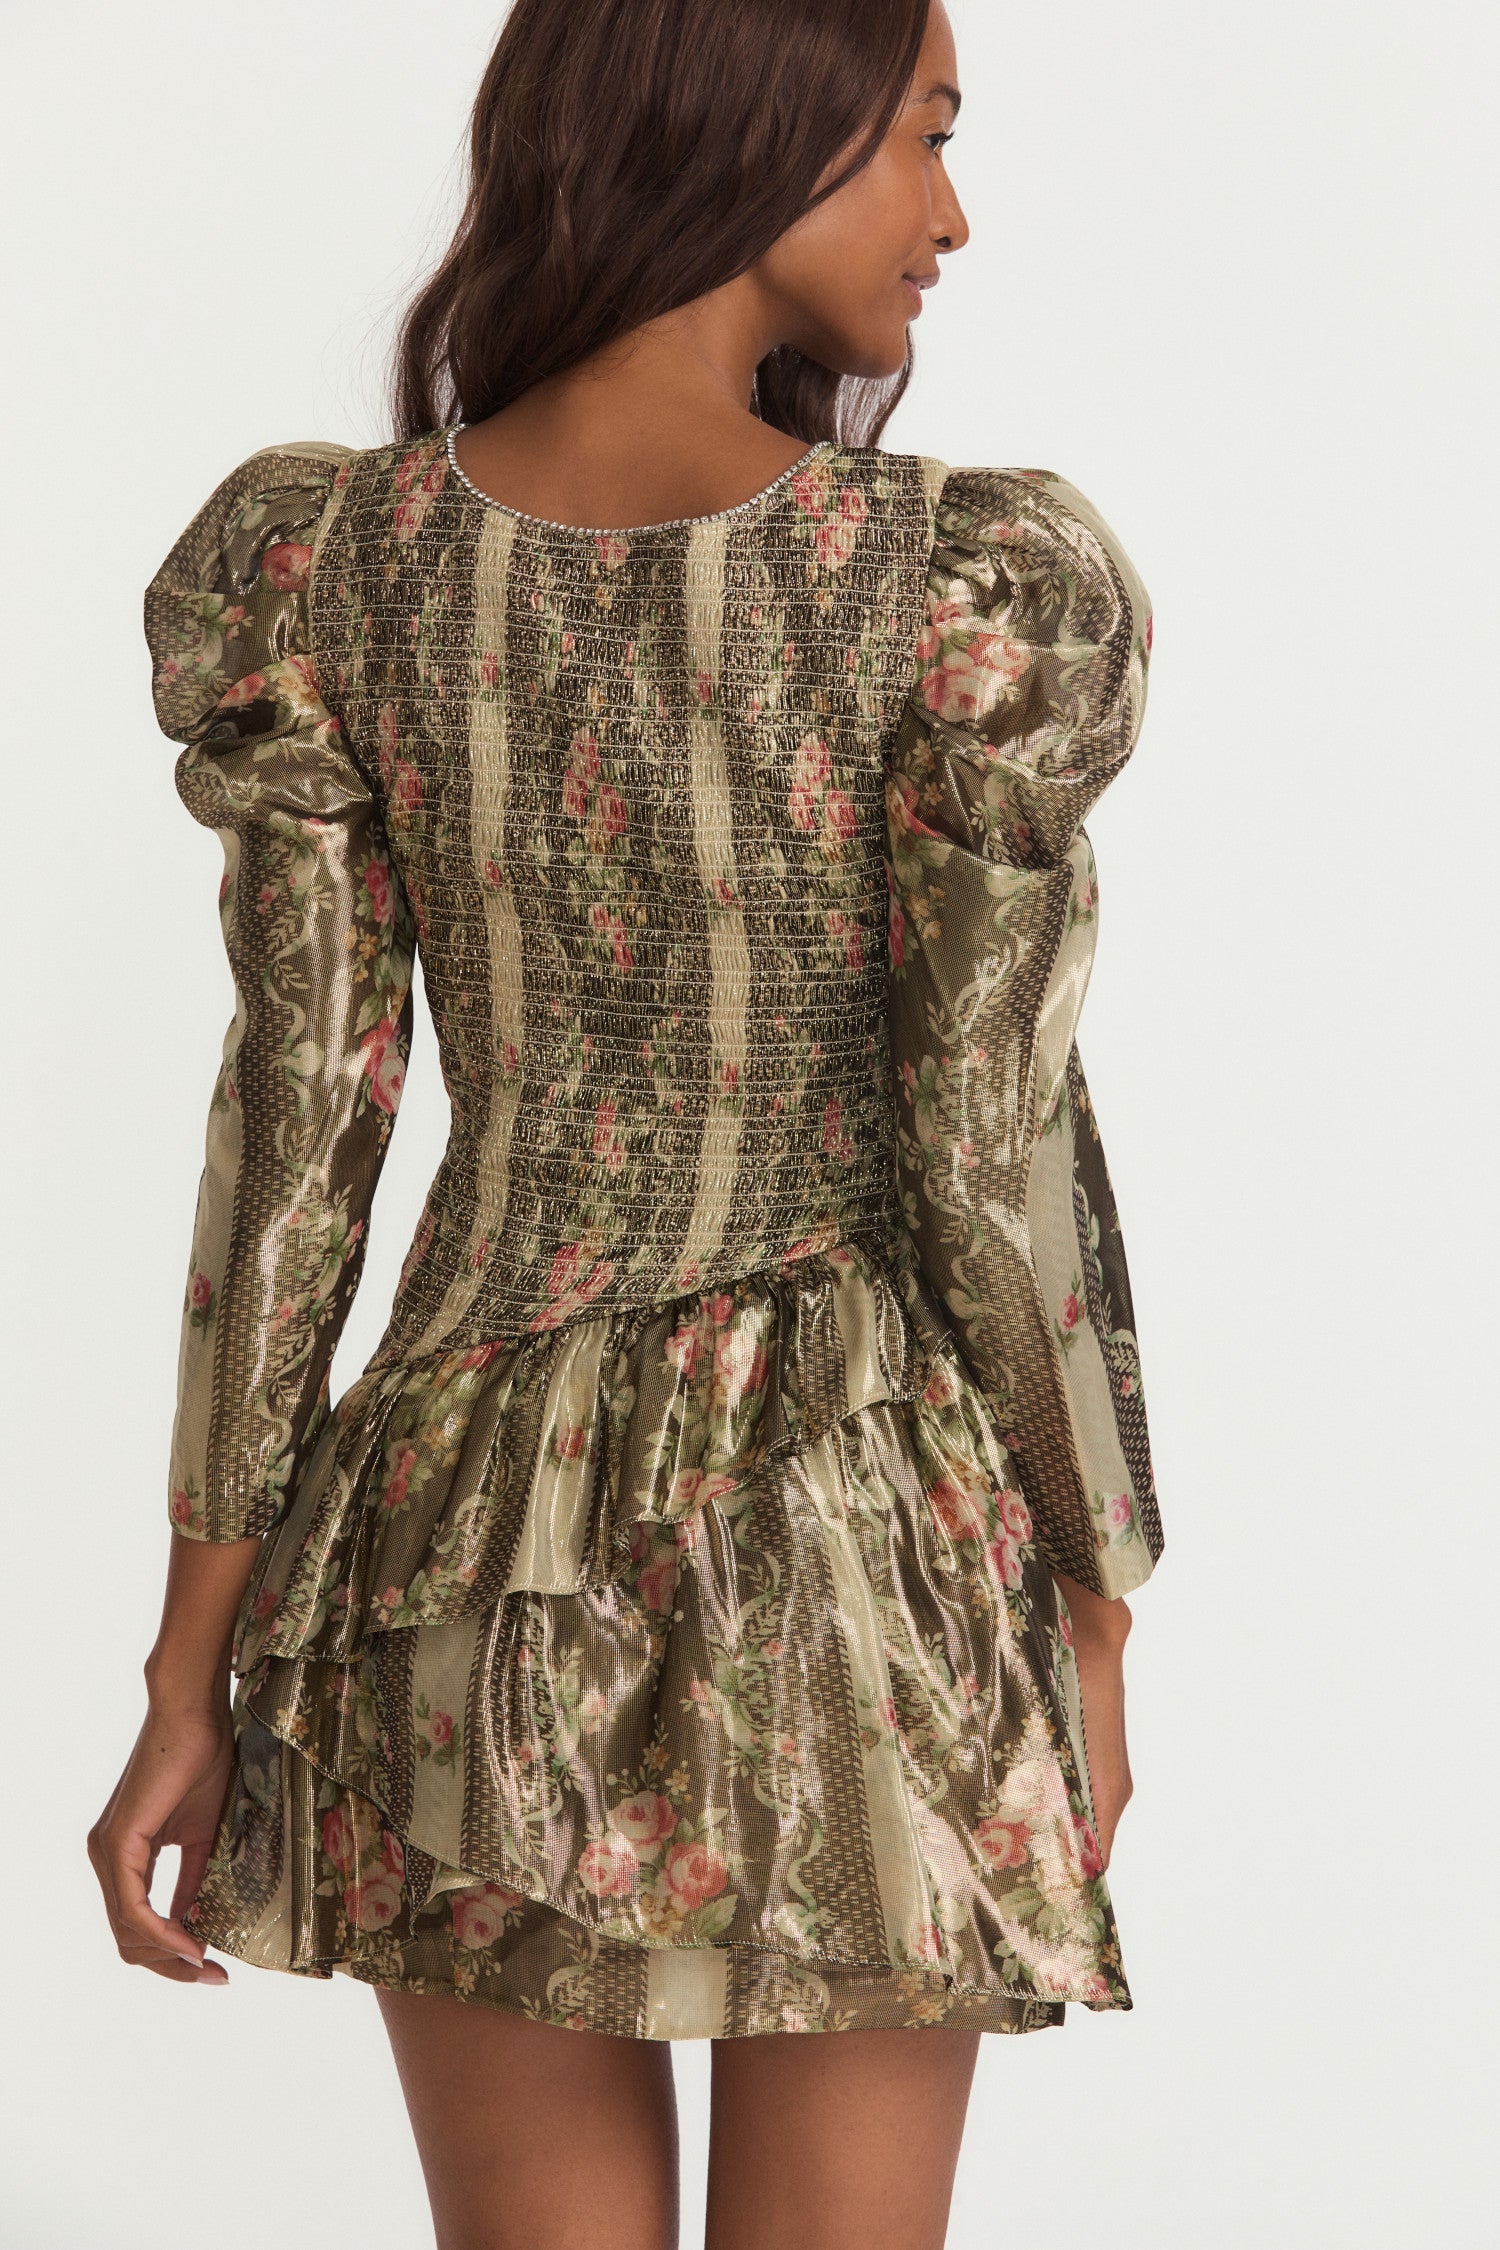 Green and floral mini dress with a printed lurex lame fabric the dress features a smocked bodice, elegant mutton sleeves with shirring at the shoulders that taper into a clean opening, and an asymmetrically tiered skirt. 